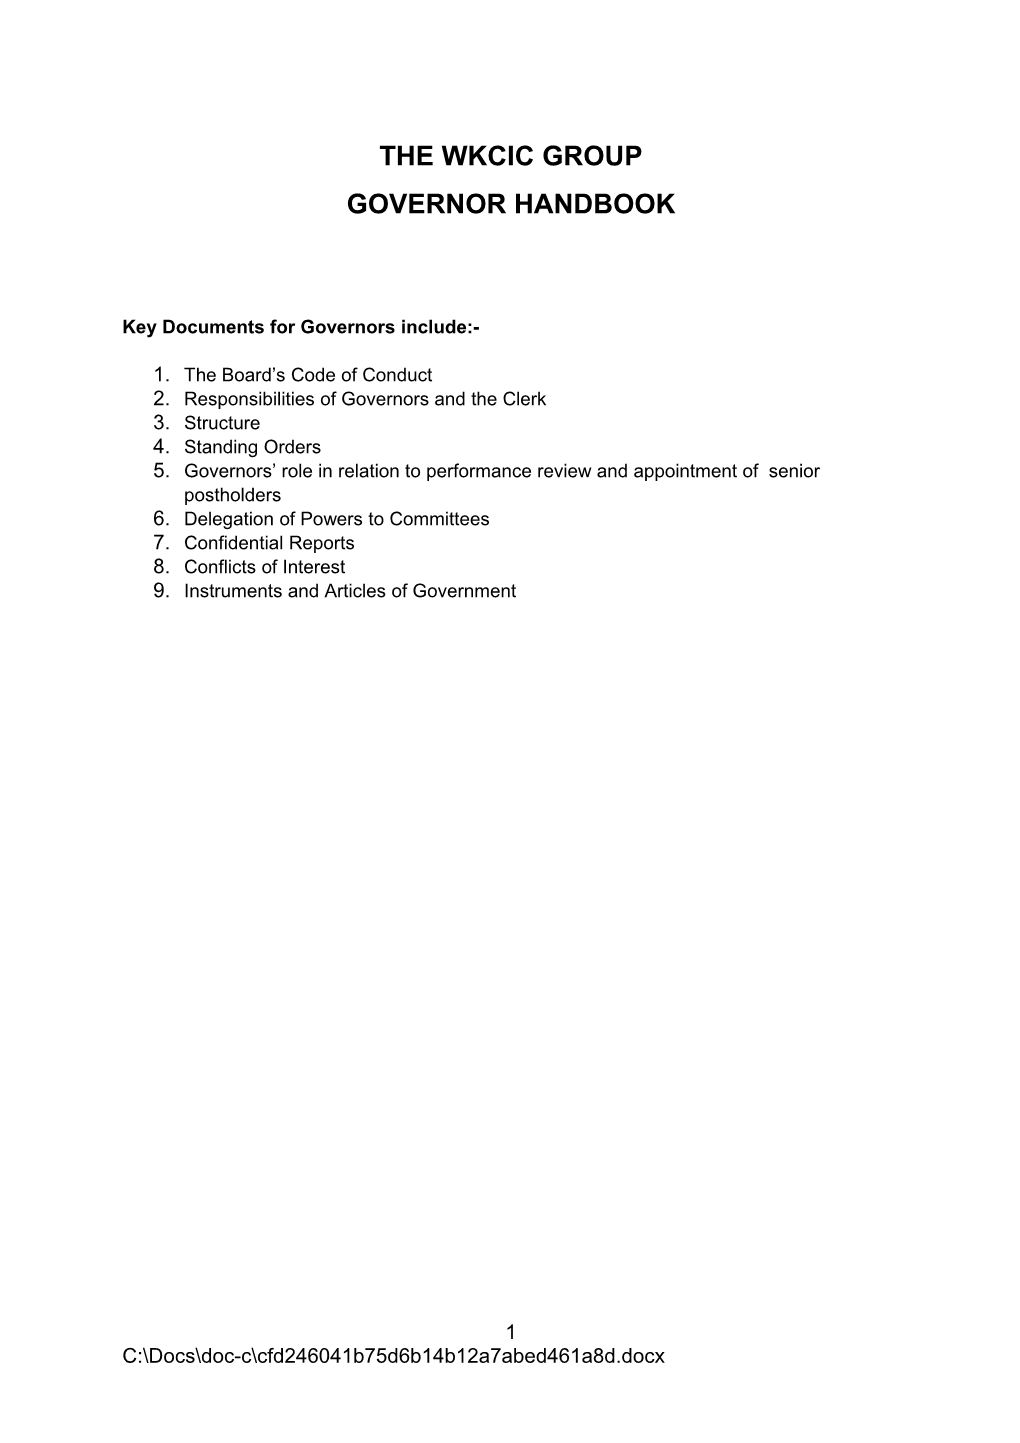 Key Documents for Governors Include